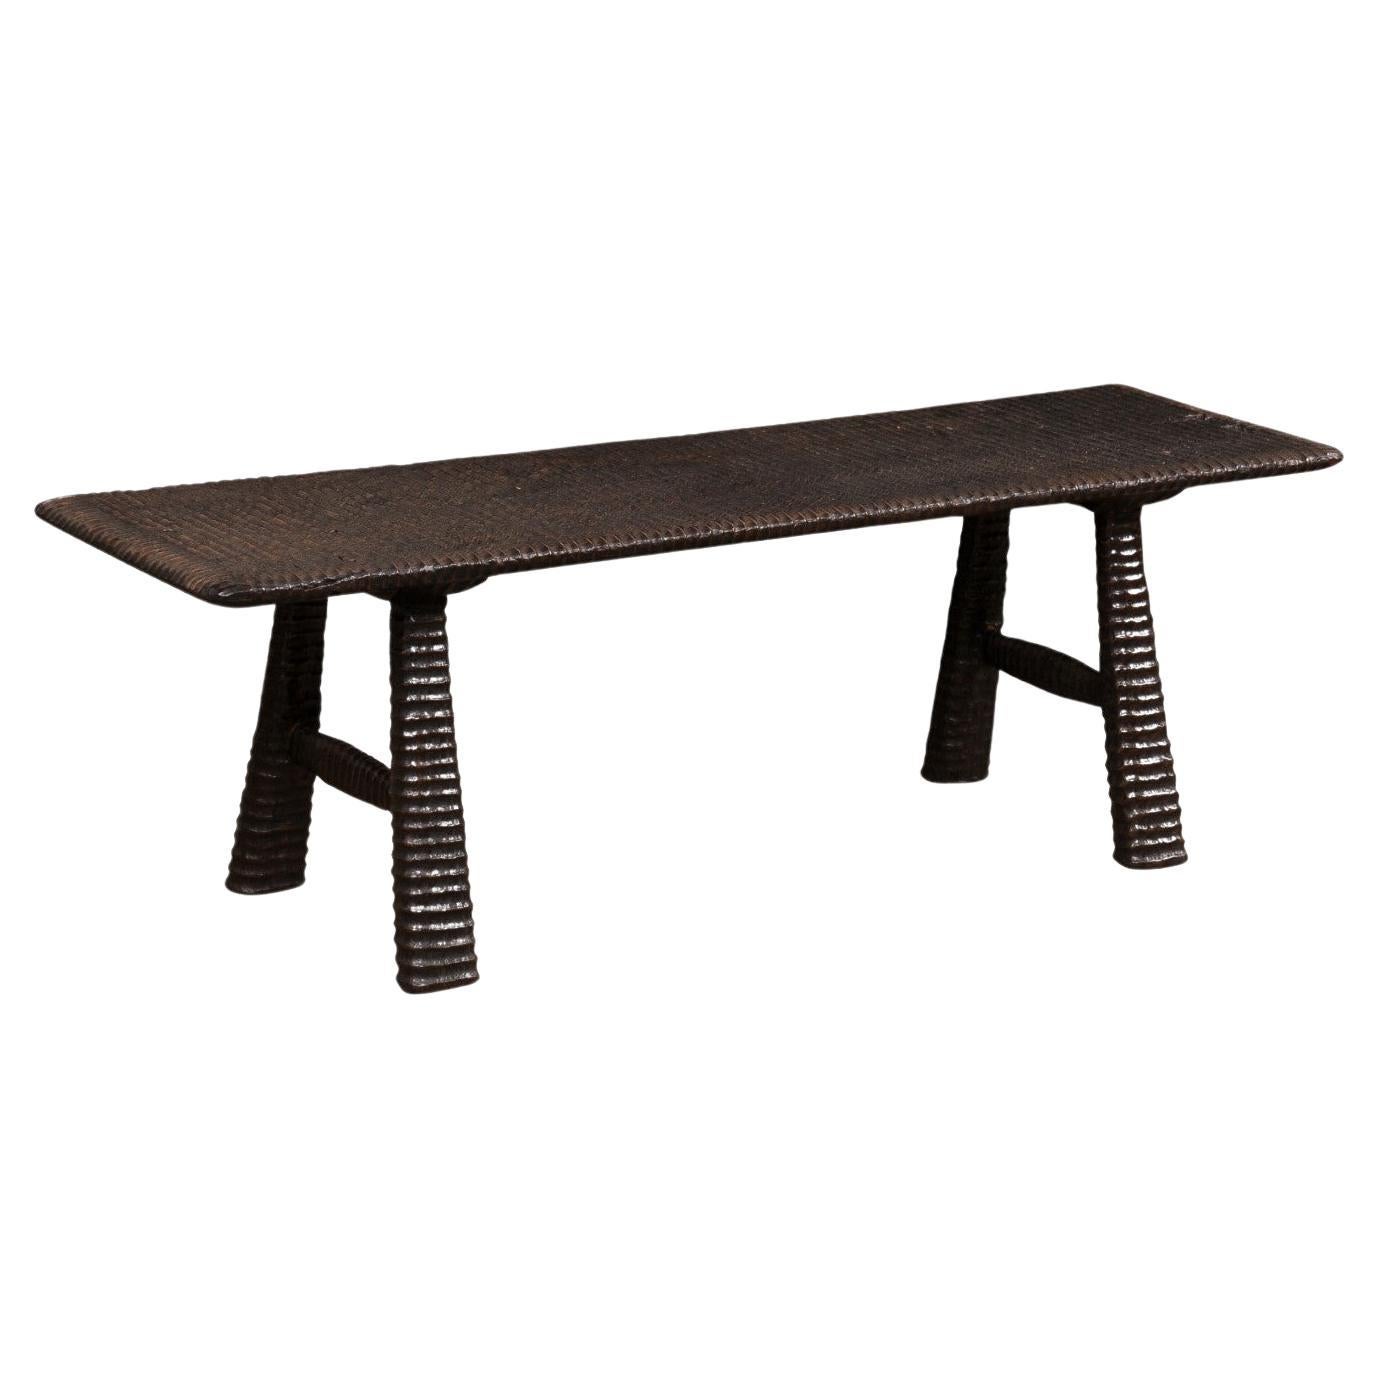 Artisan Crafted Trestle-Leg Bench with Textured and Ebonized Wood